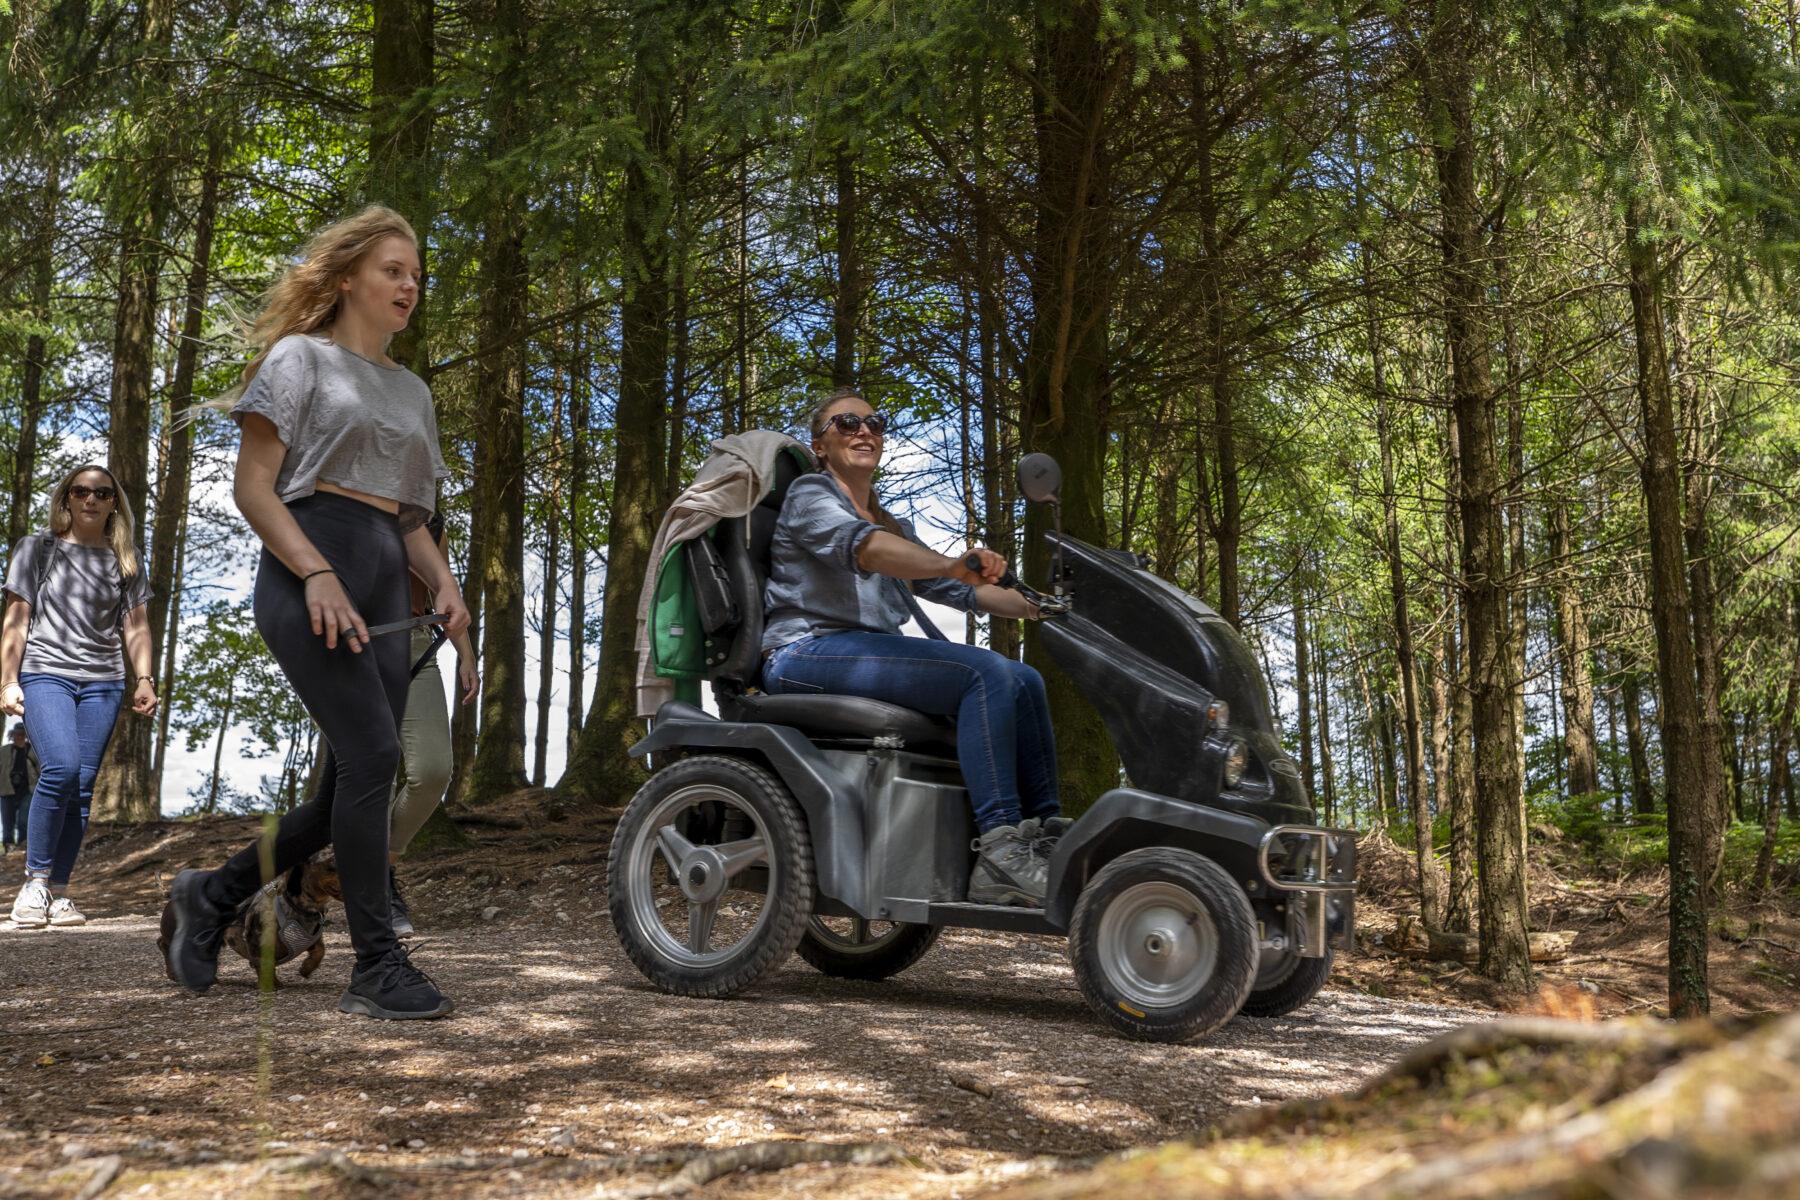 A young woman walks next to a woman on a mobility scooter in a conifer plantation